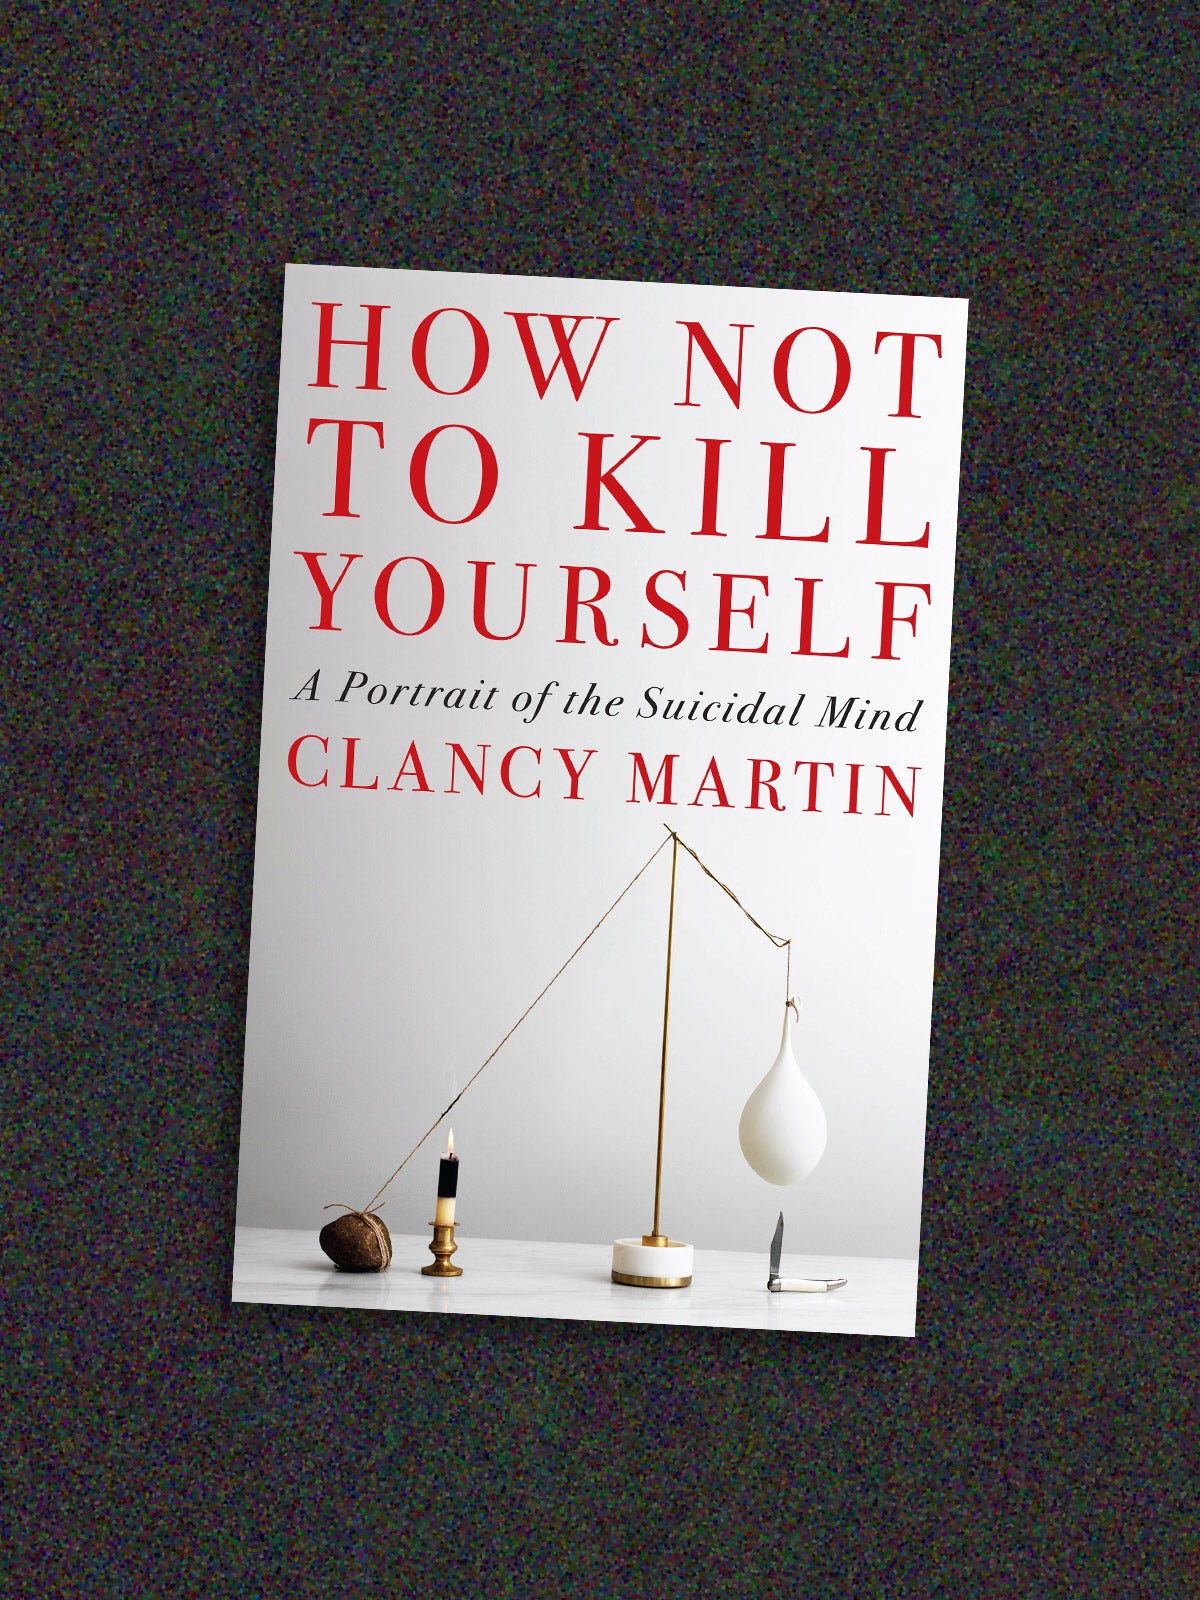 How To Kill Myself Surviving suicidal thoughts: author Clancy Martin on finding hope